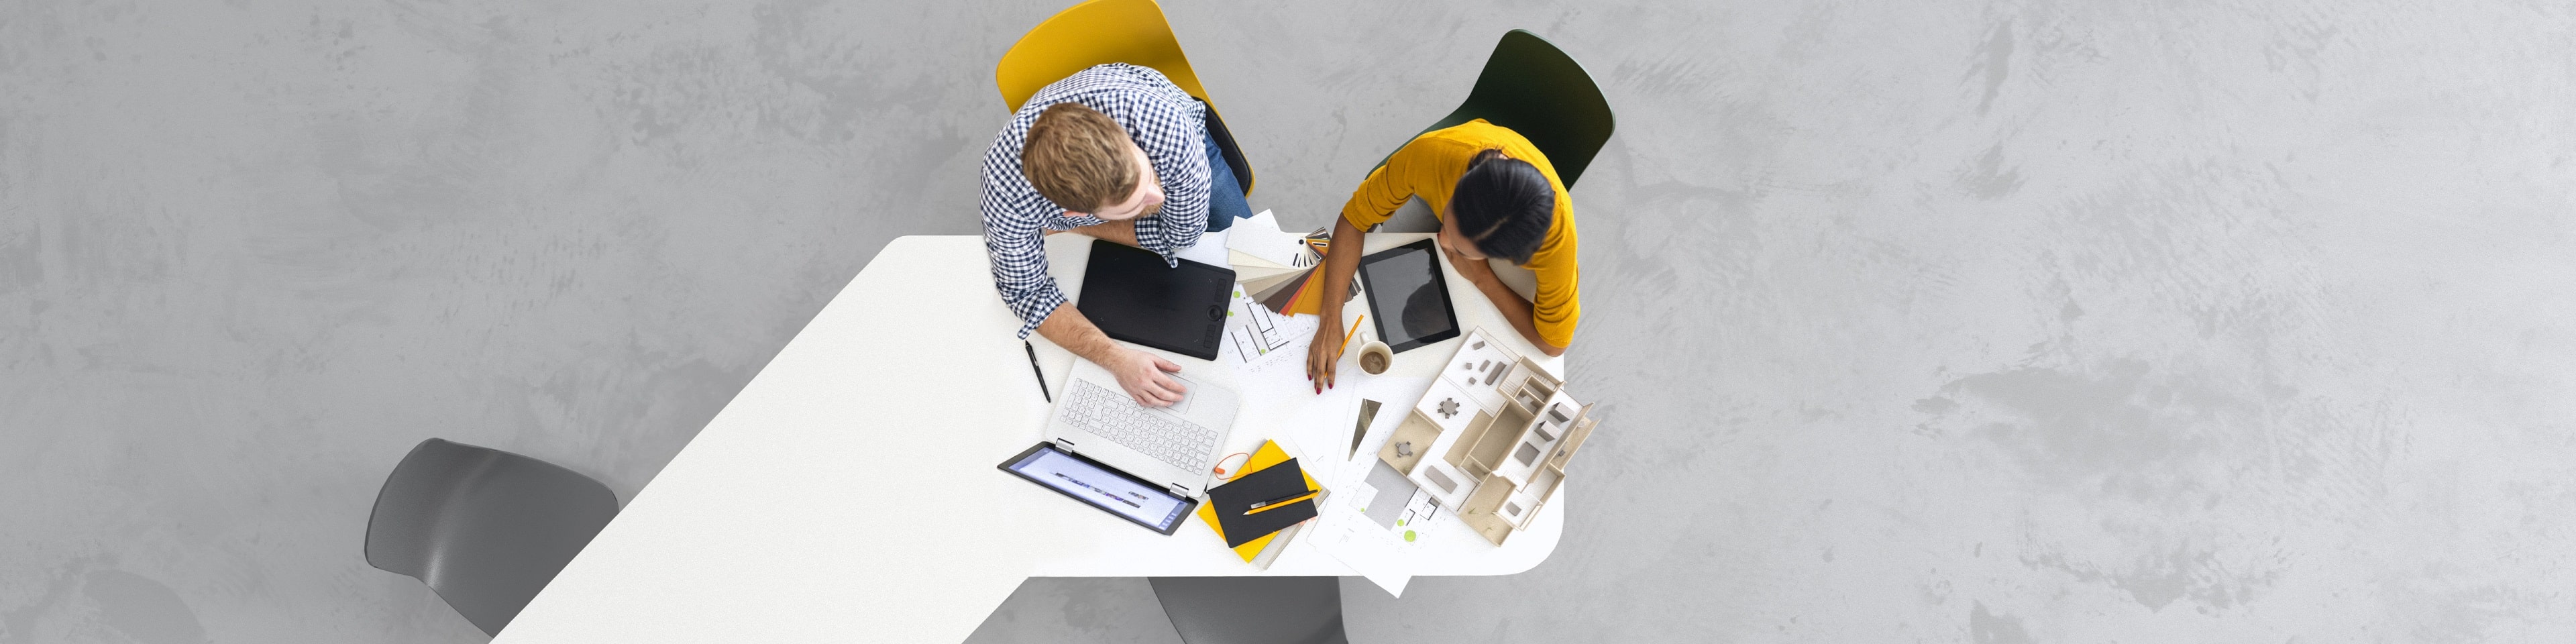 Overhead view of two architects working on a project in the office